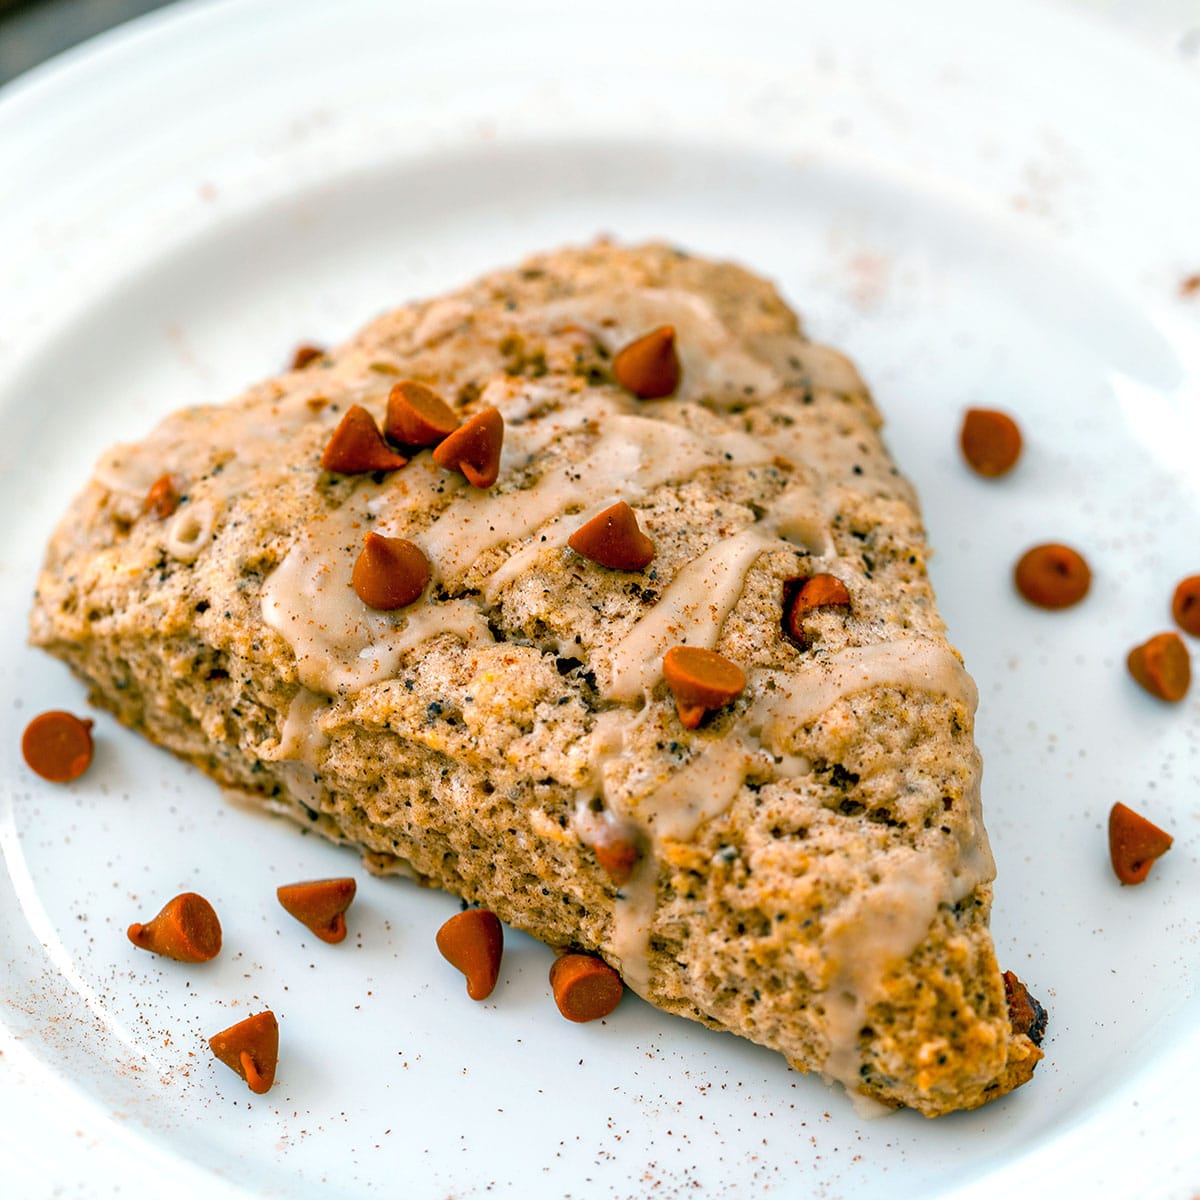 Coffee Cinnamon Scones -- If you think scones are supposed to be dry and boring baked goods, you need to let these Coffee Cinnamon Scones change your mind! Perfectly buttery and packed with coffee, cinnamon, and cinnamon chips, you'll want to start every morning with one of these scones | wearenotmartha.com